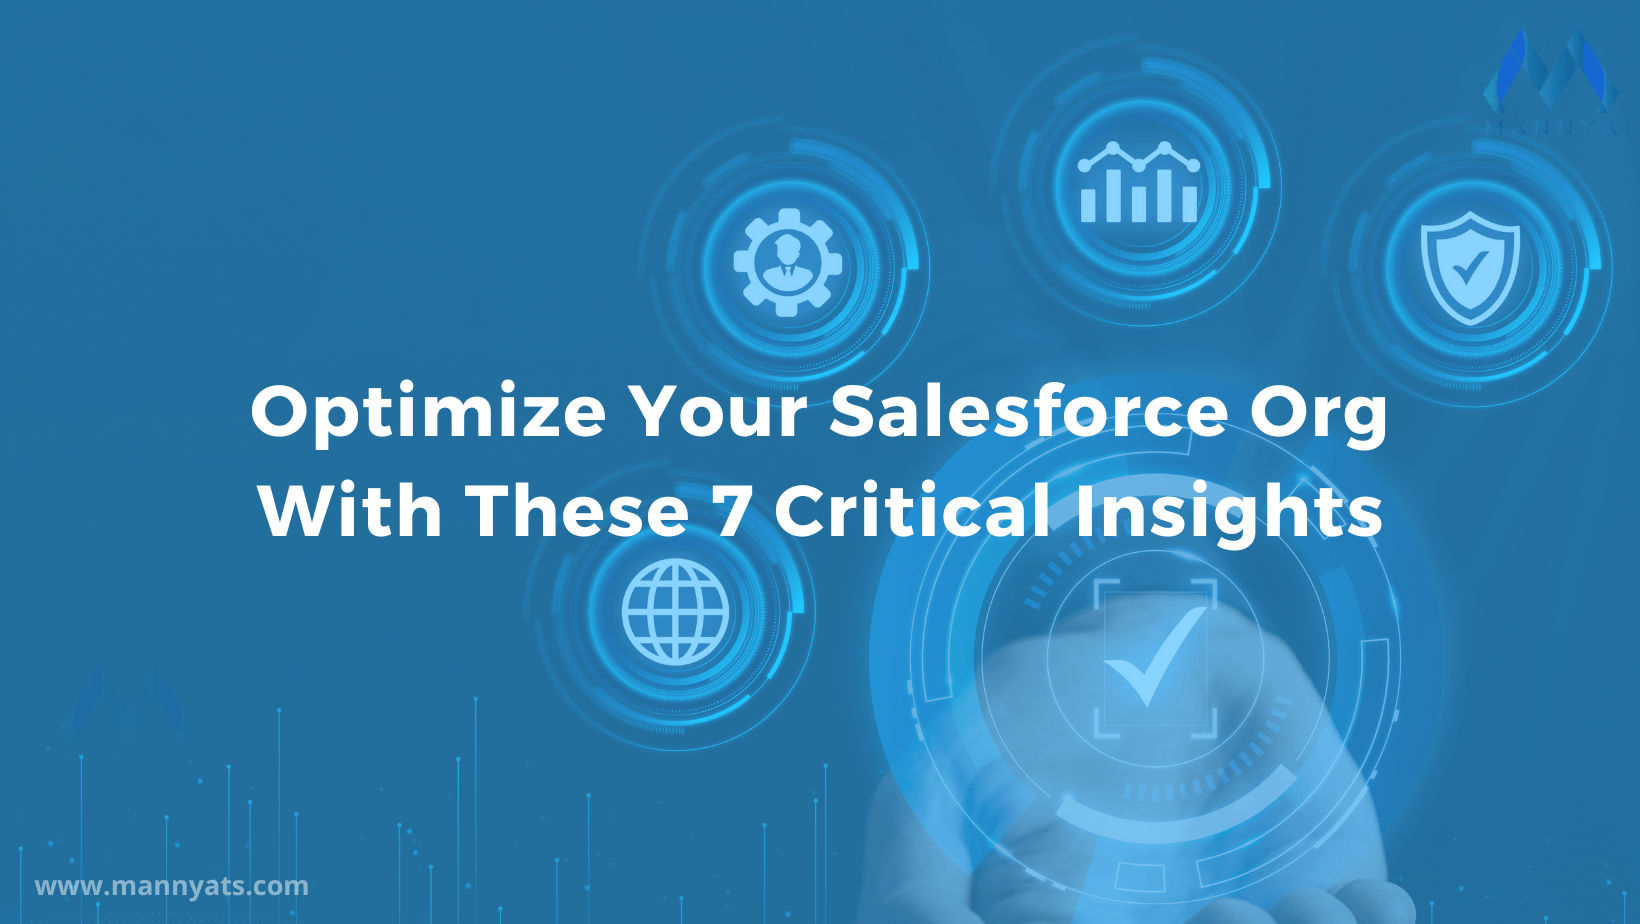 Optimize Your Salesforce Org With These 7 Critical Insights